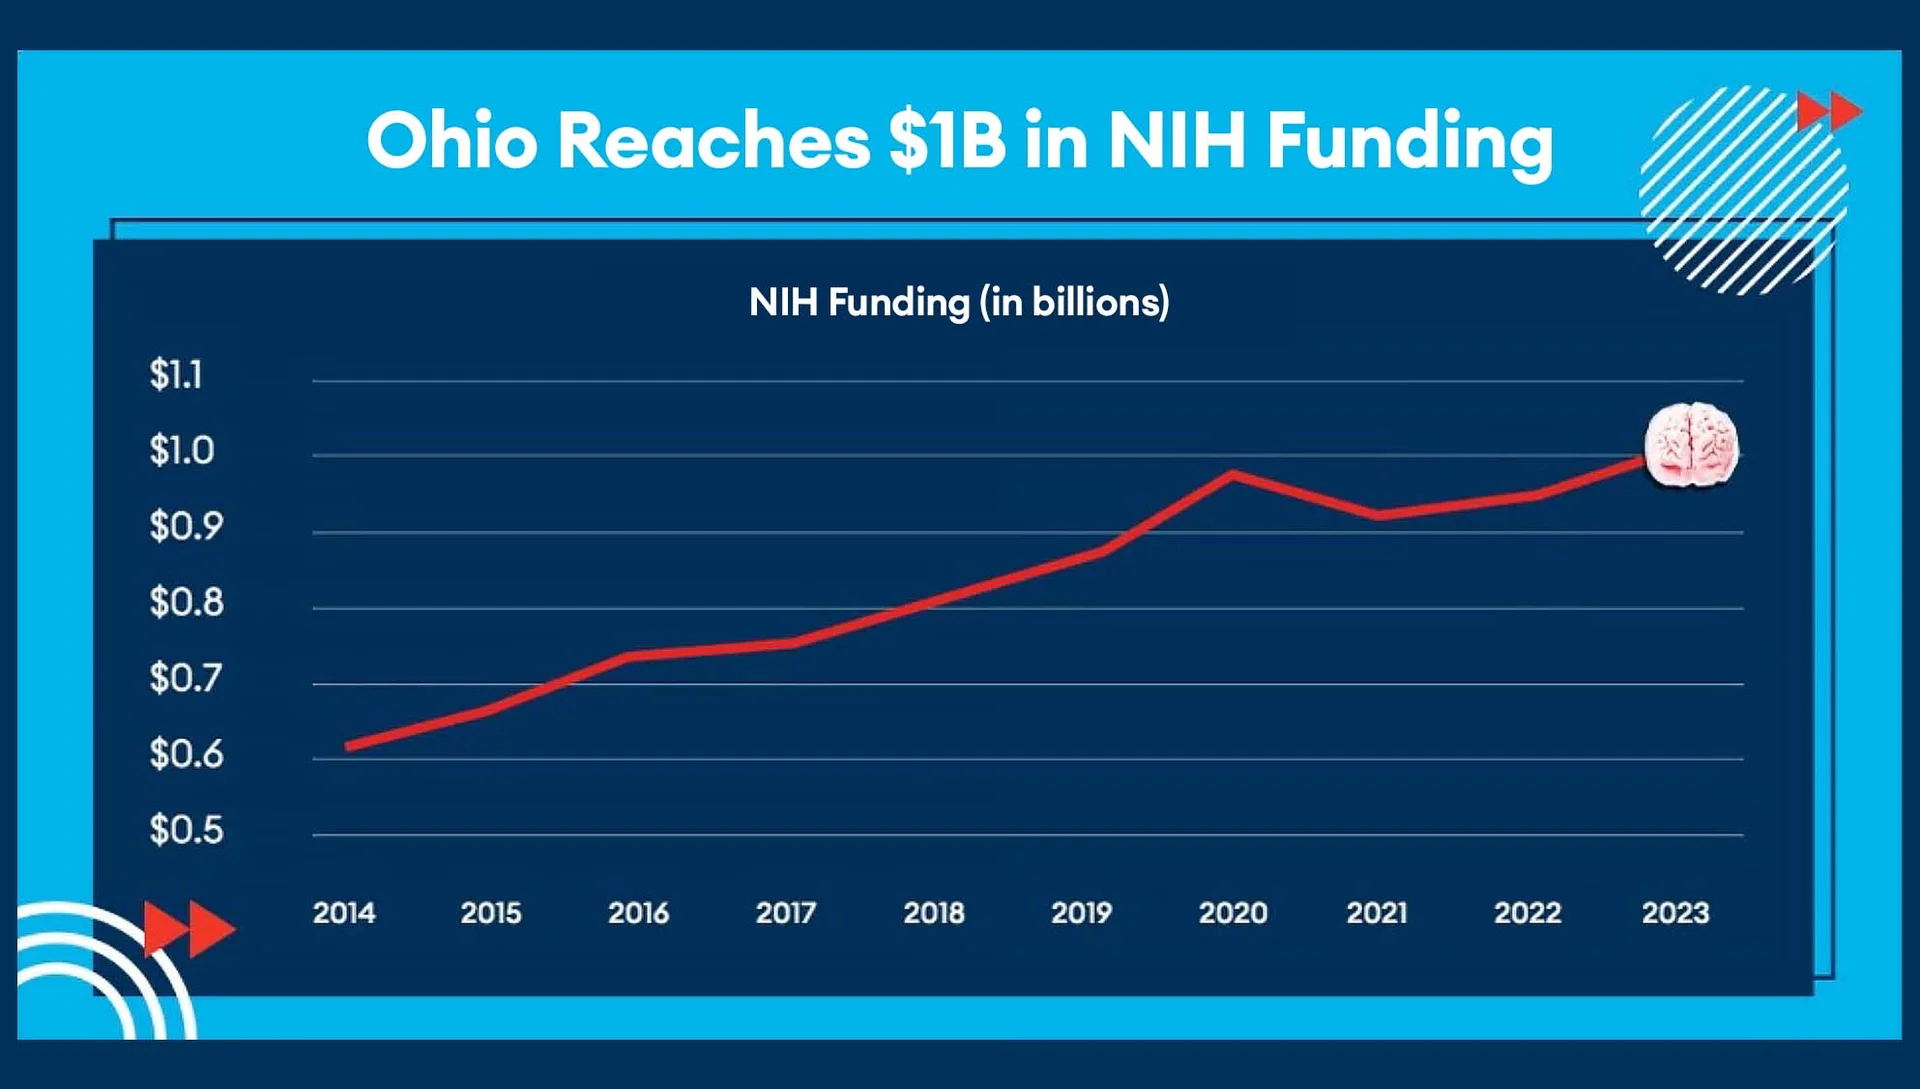 A graphic showing NIH Funding over time